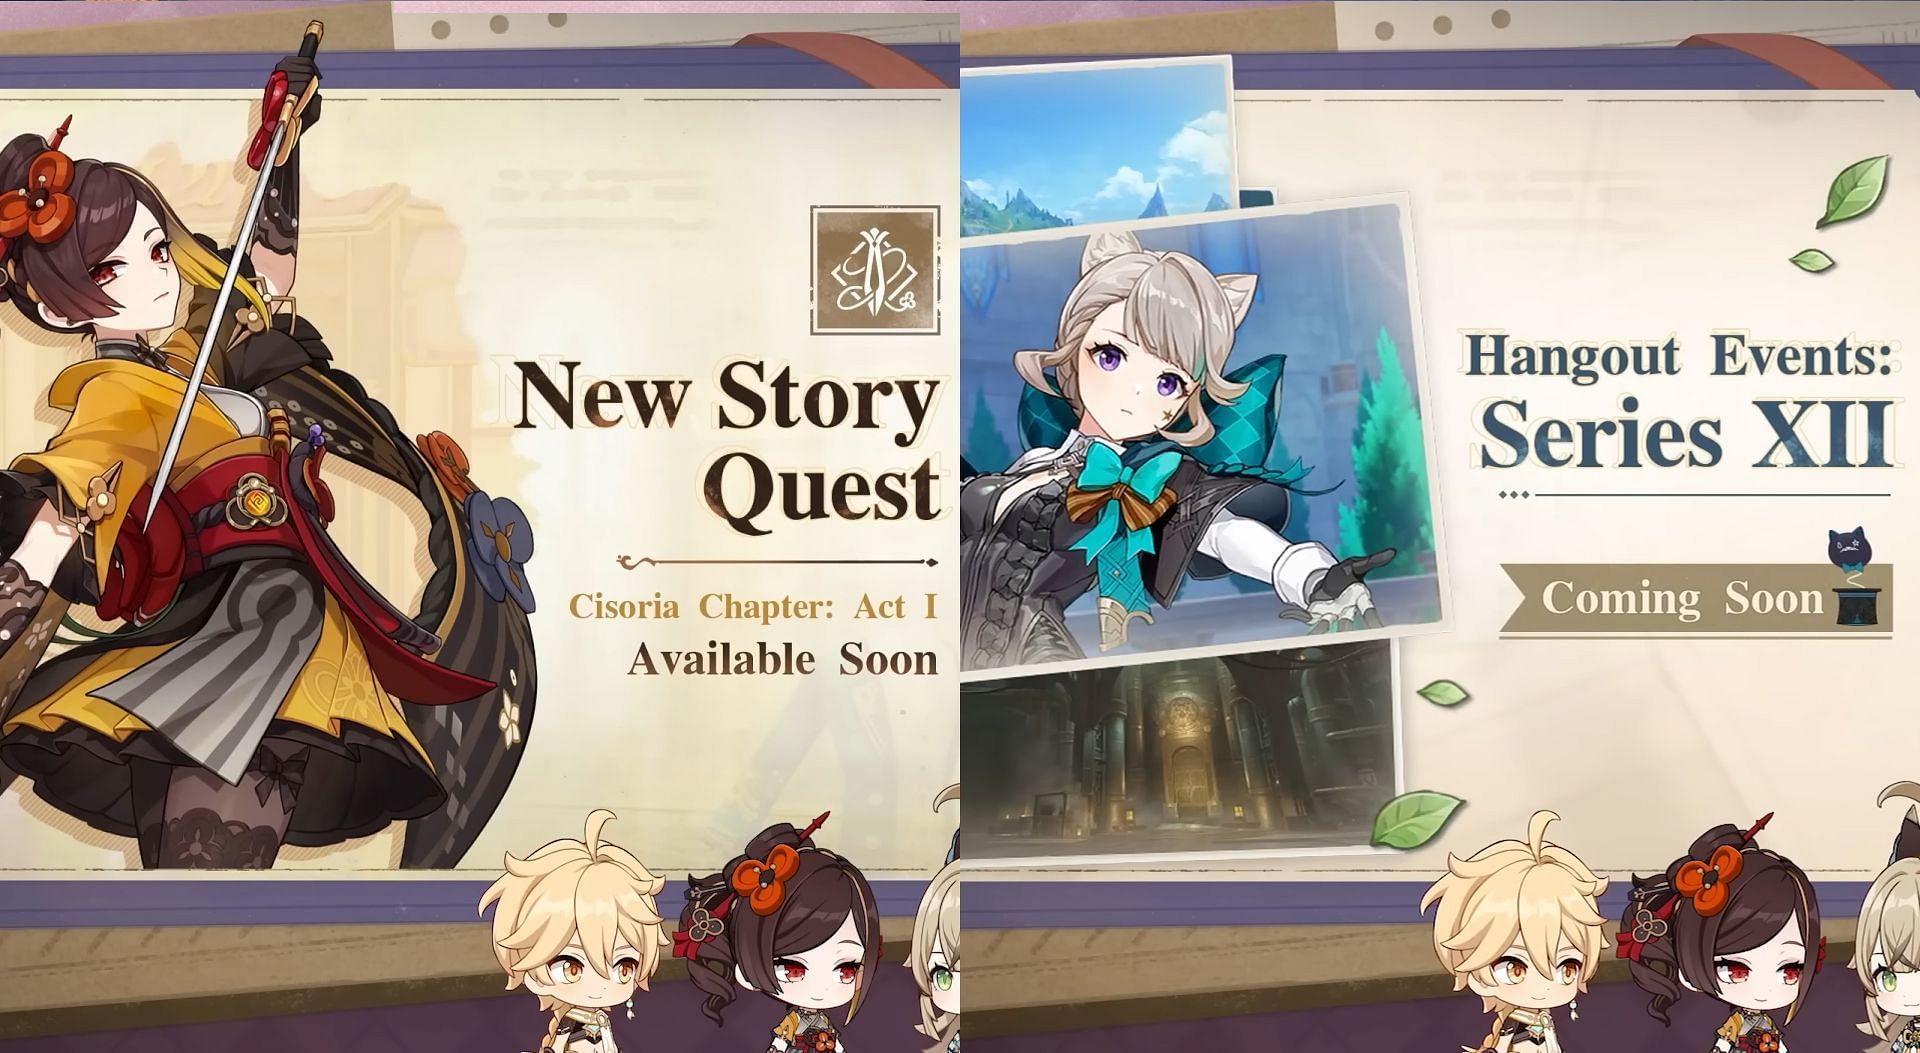 Chiori Story quest and Lynette Hangout quest. (Image via HoYoverse)